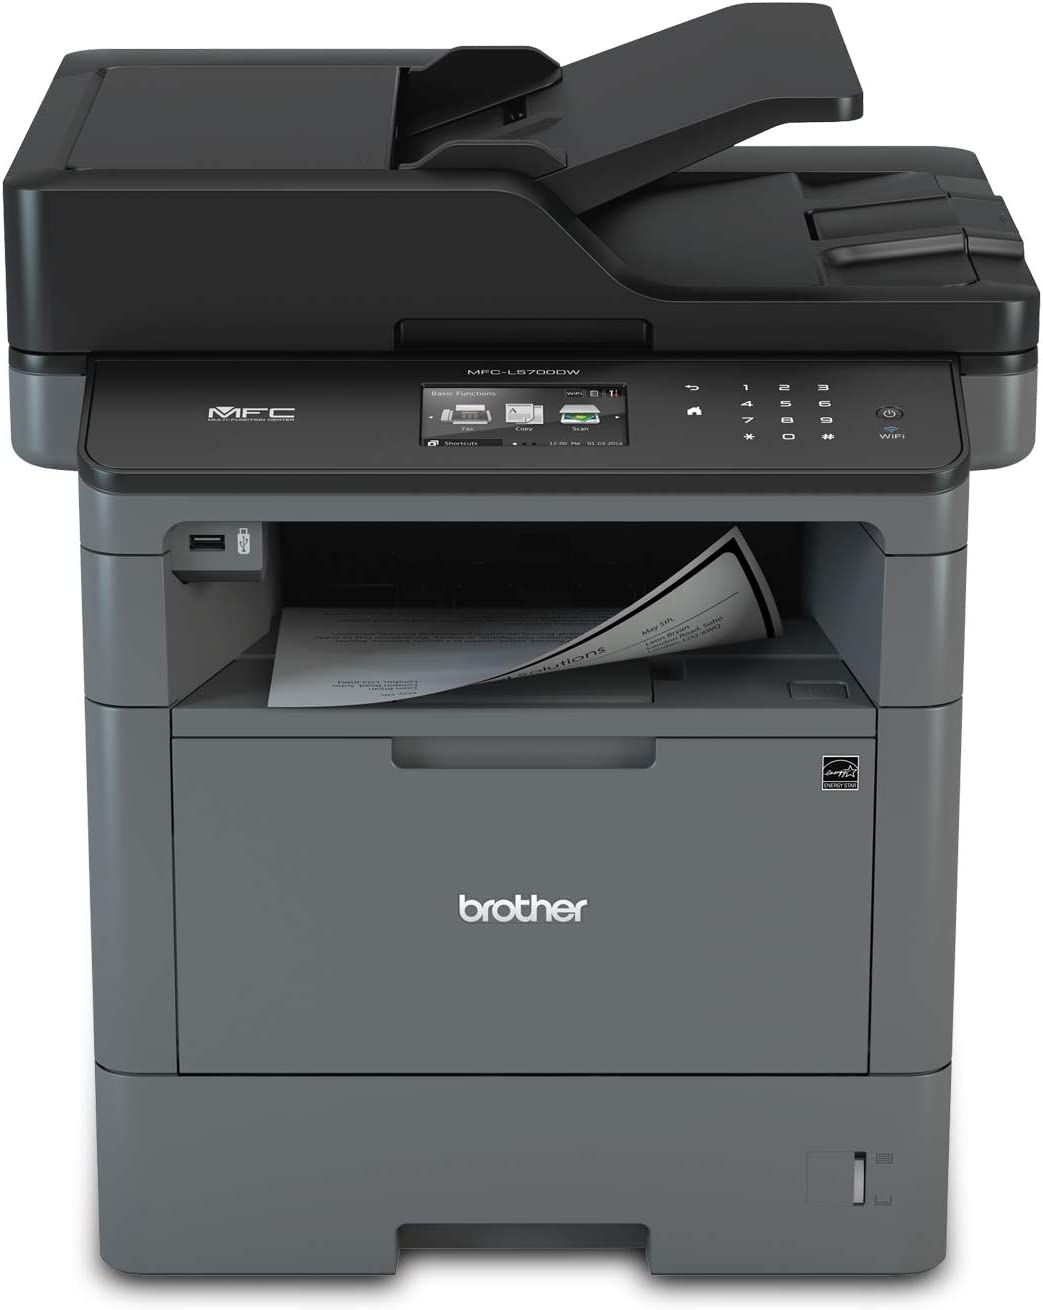 Brother Monochrome Laser Multifunction All-in-One Printer, MFC-L5700DW, Flexible Network Connectivity